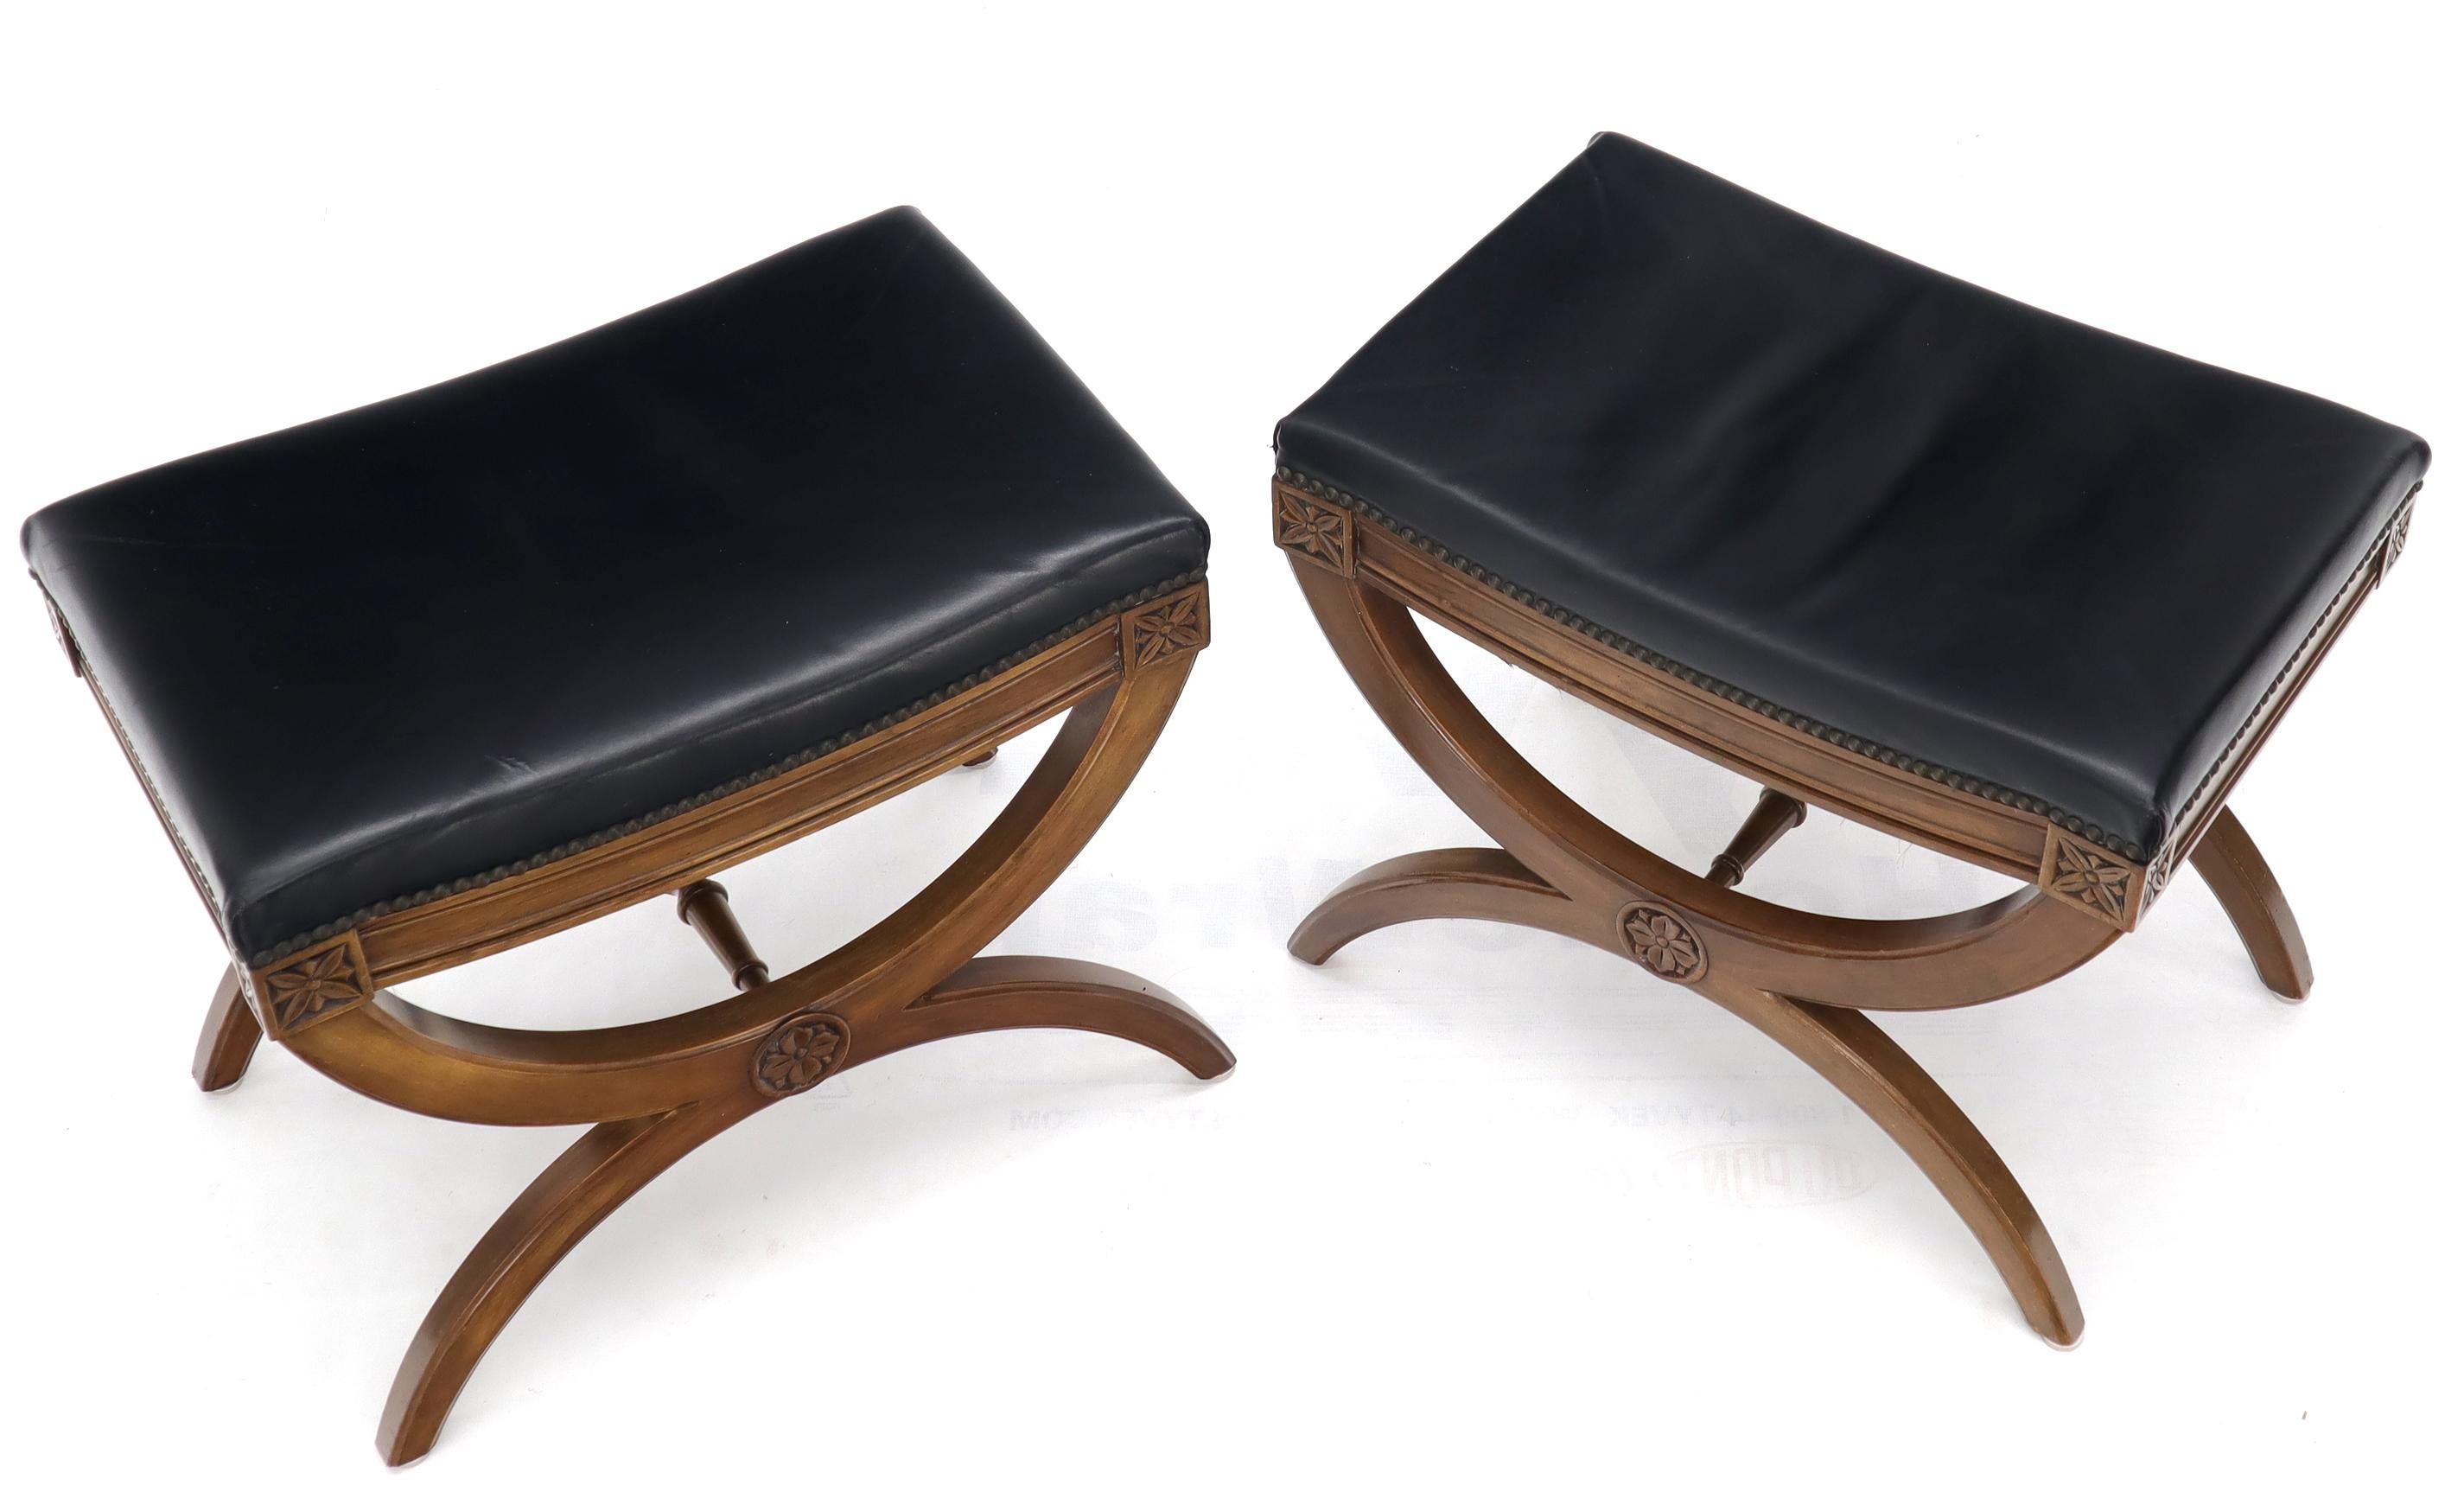 Pair of high quality vintage X-base fruitwood benches by Kindel Furniture Co.